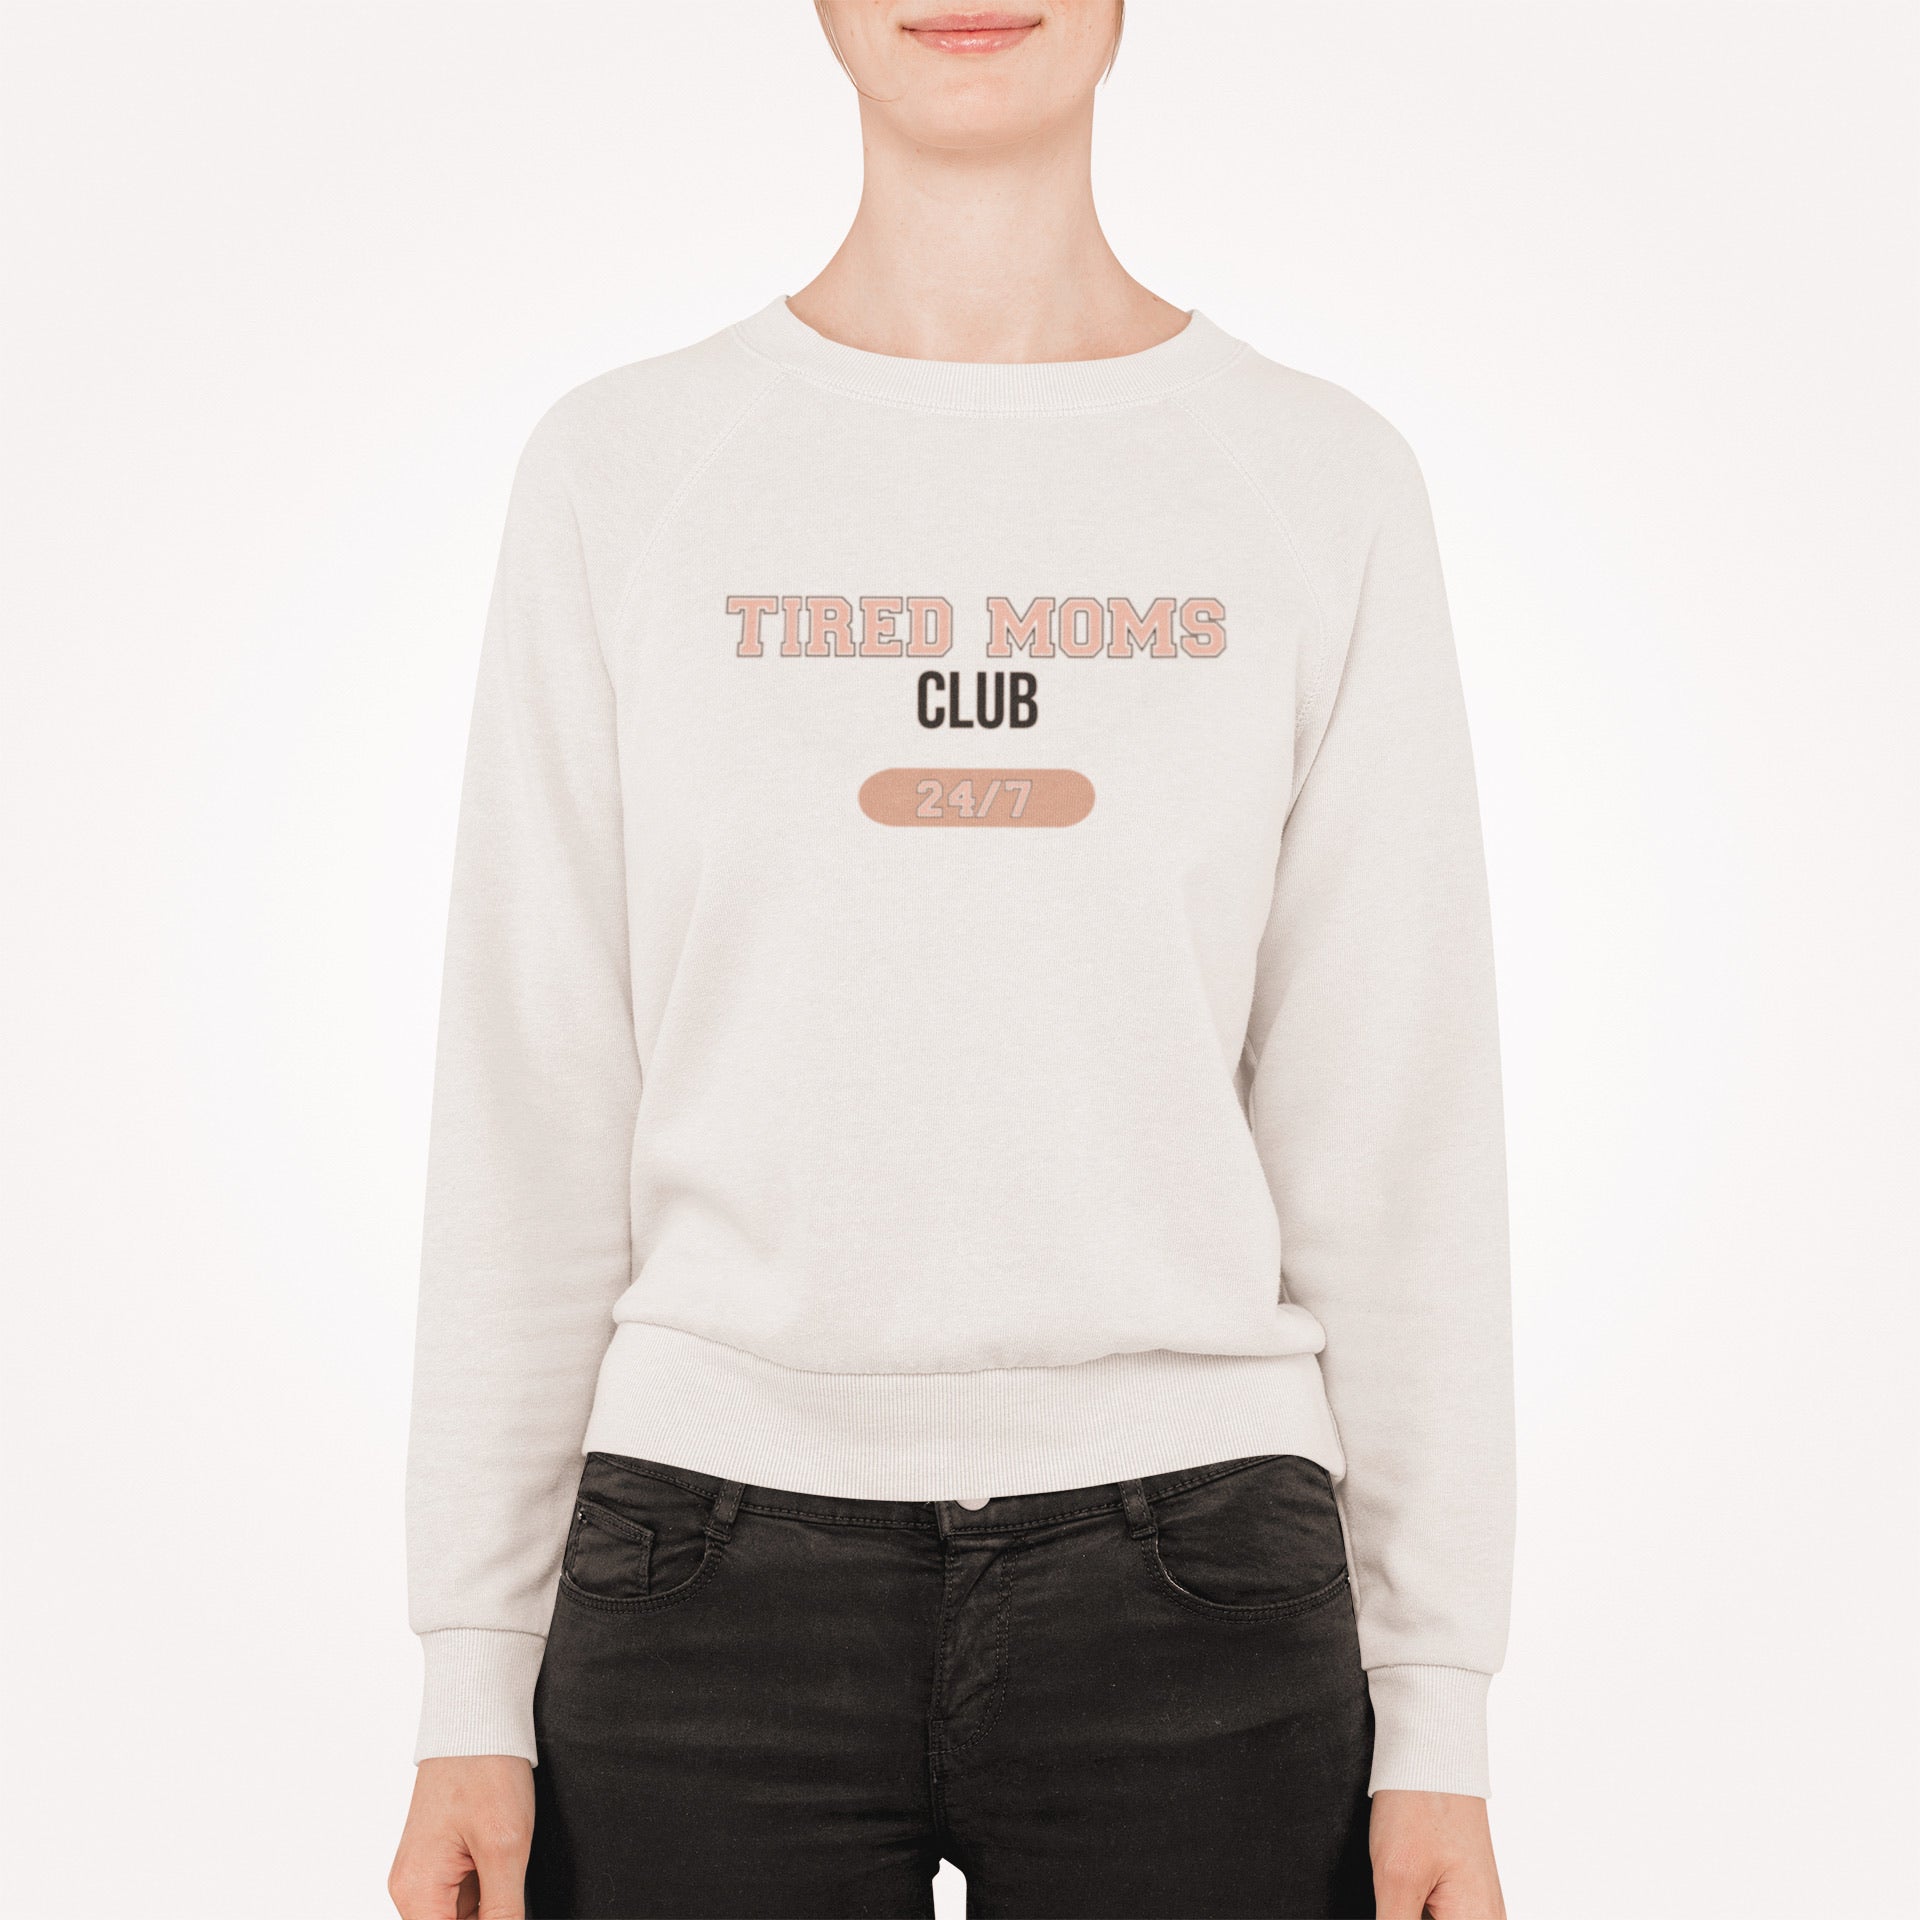 TIRED MOMS CLUB SWEATER